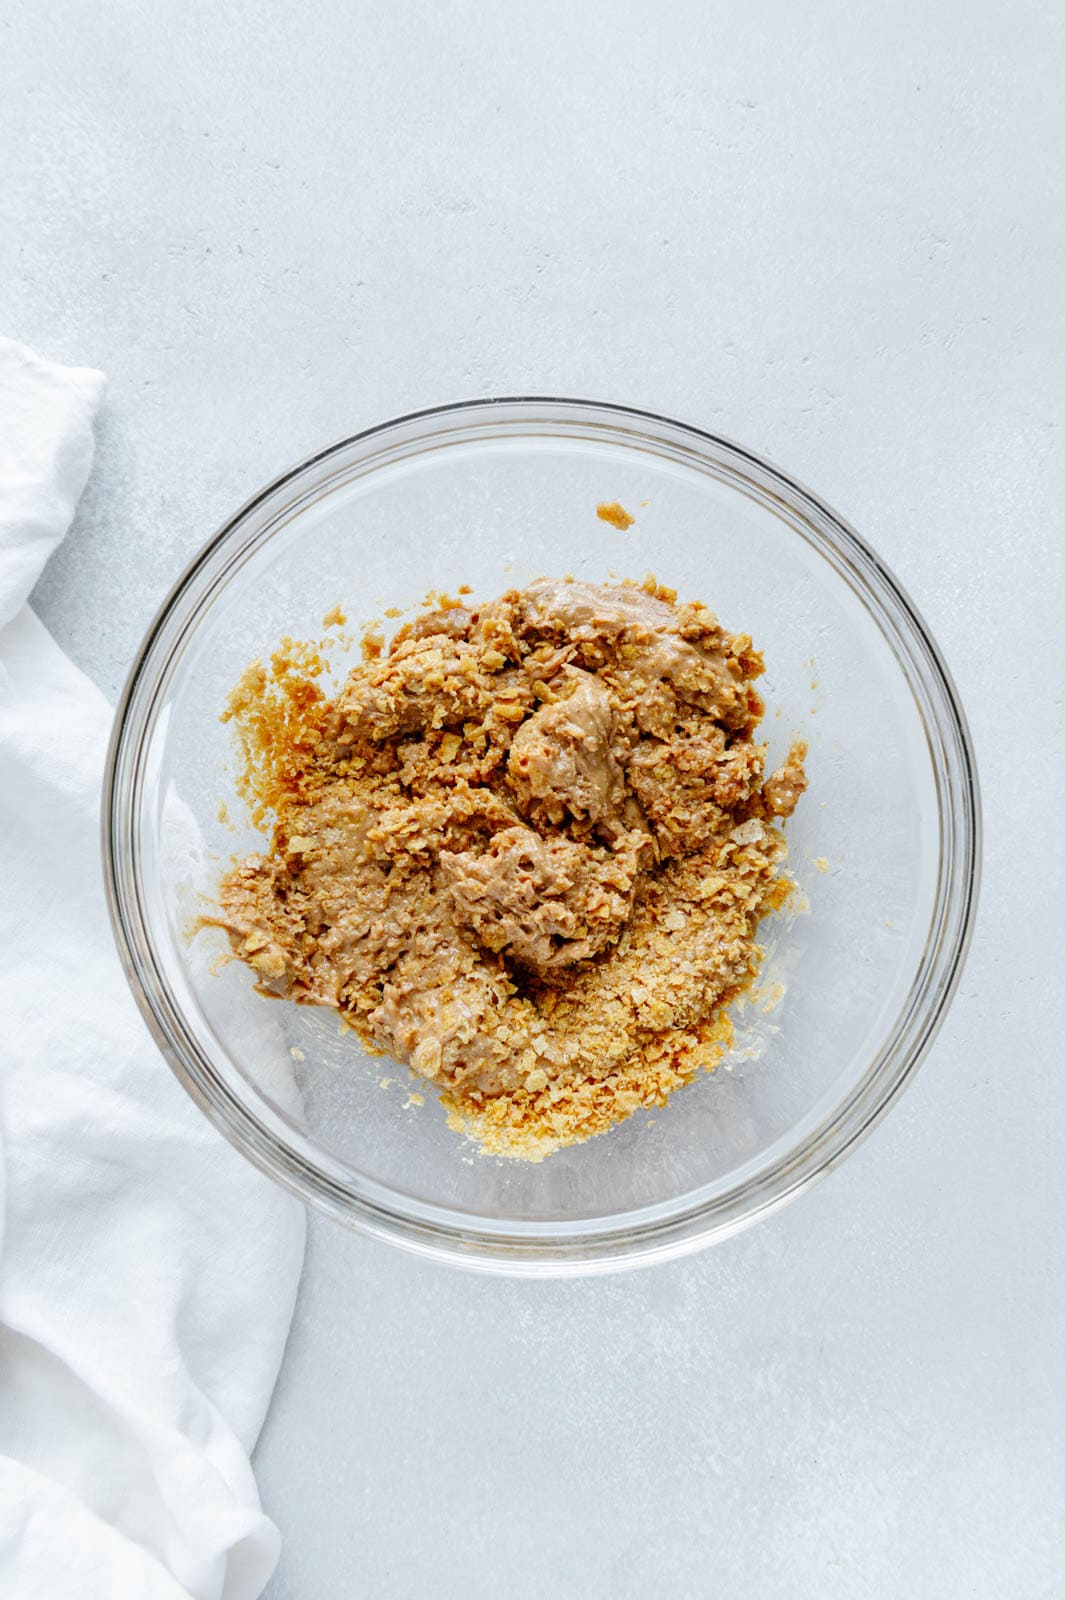 Peanut butter, cornflakes, vanilla extract, and salt in a mixing bowl.